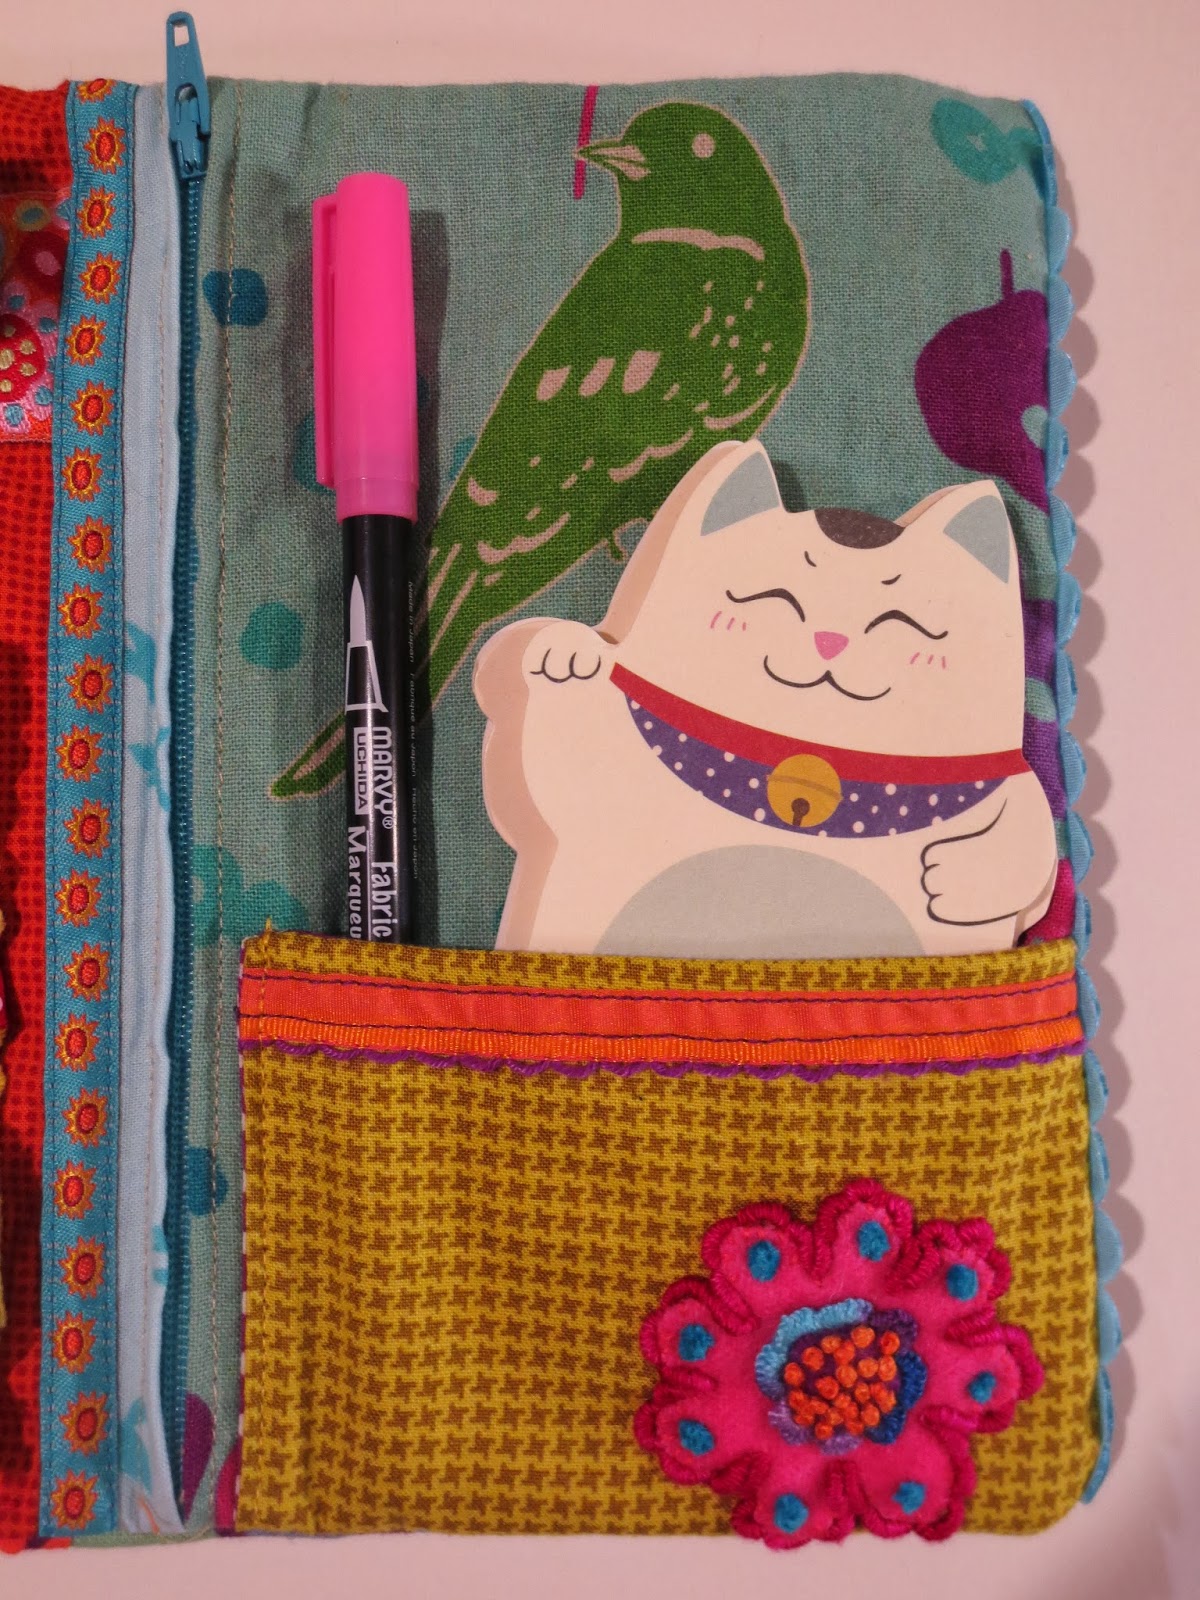 Art Journey: Wool Embroidery on a Sewing Kit